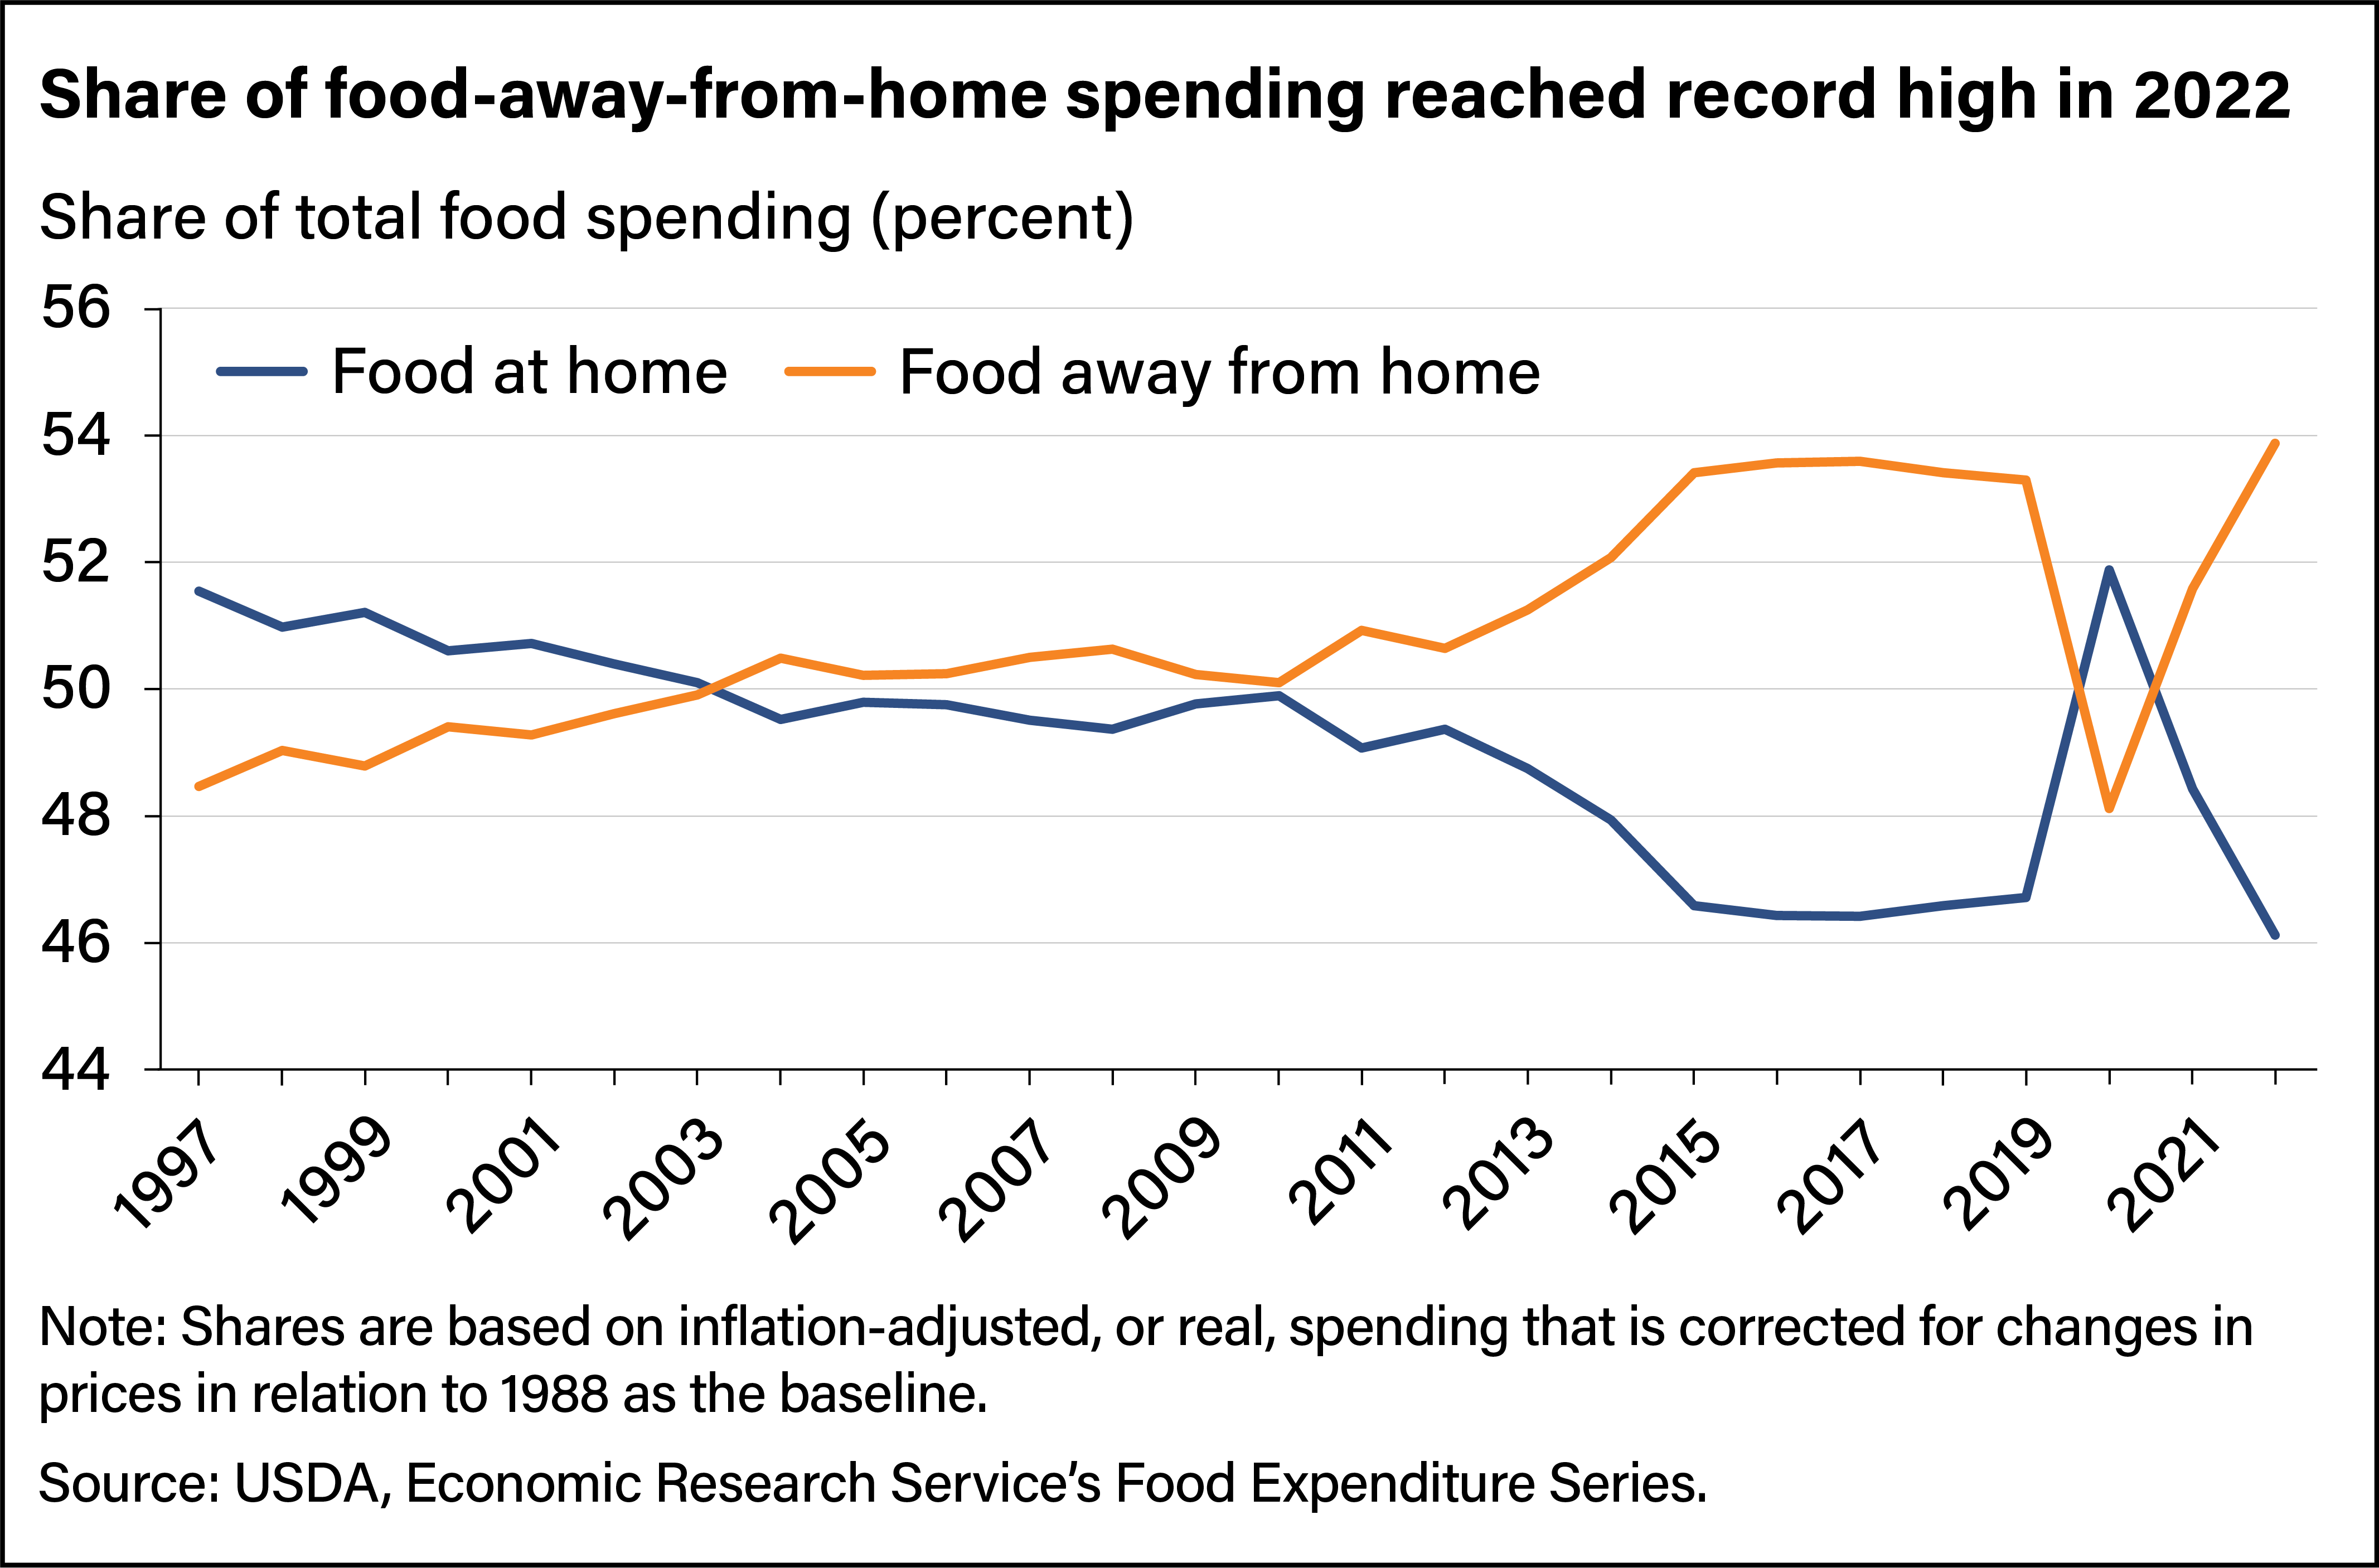 USDA ERS - Working From Home Leads to More Time Spent Preparing Food,  Eating at Home